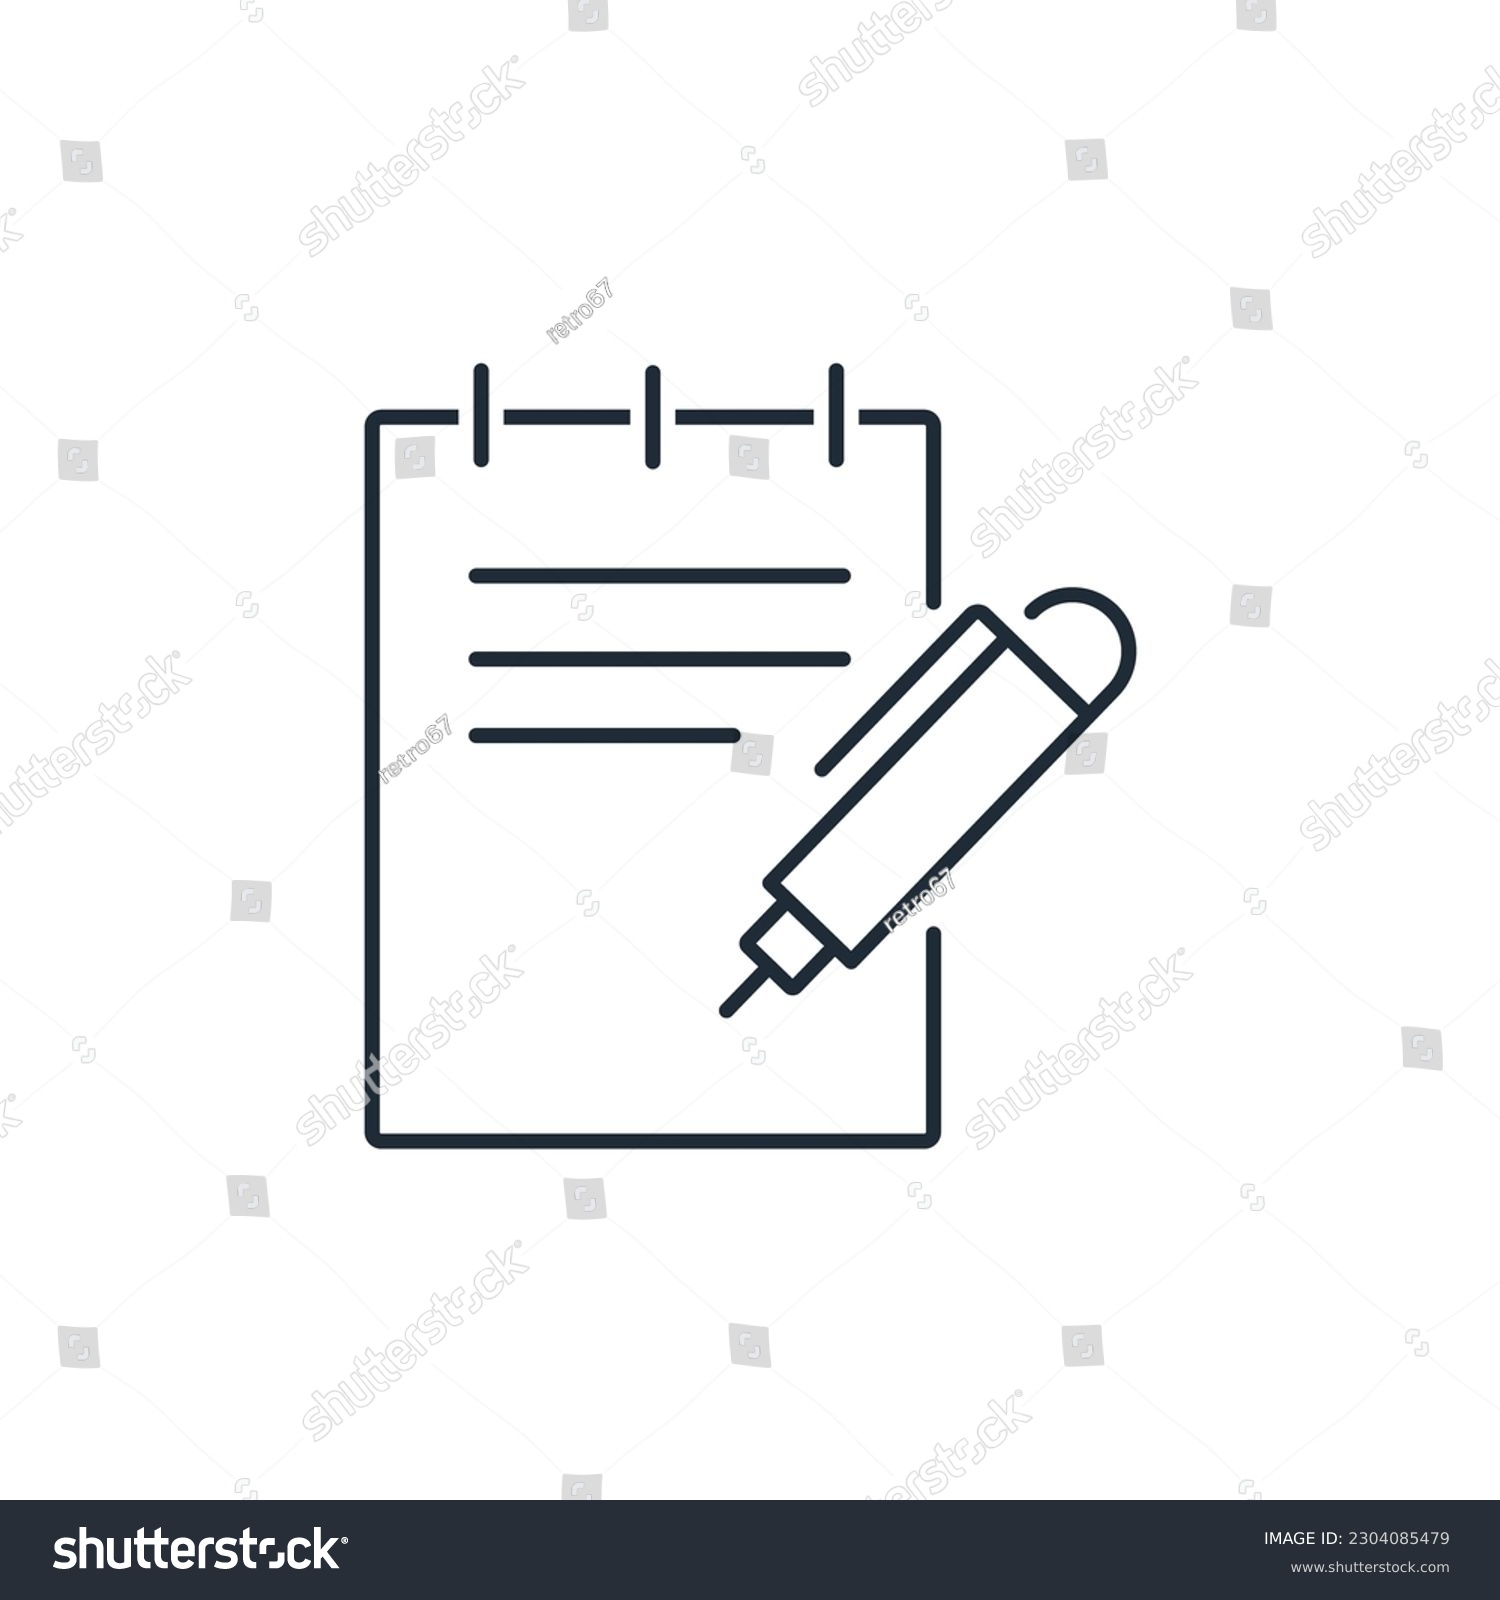 Official document. Declaration of intent. Vector linear icon isolated on white background. #2304085479